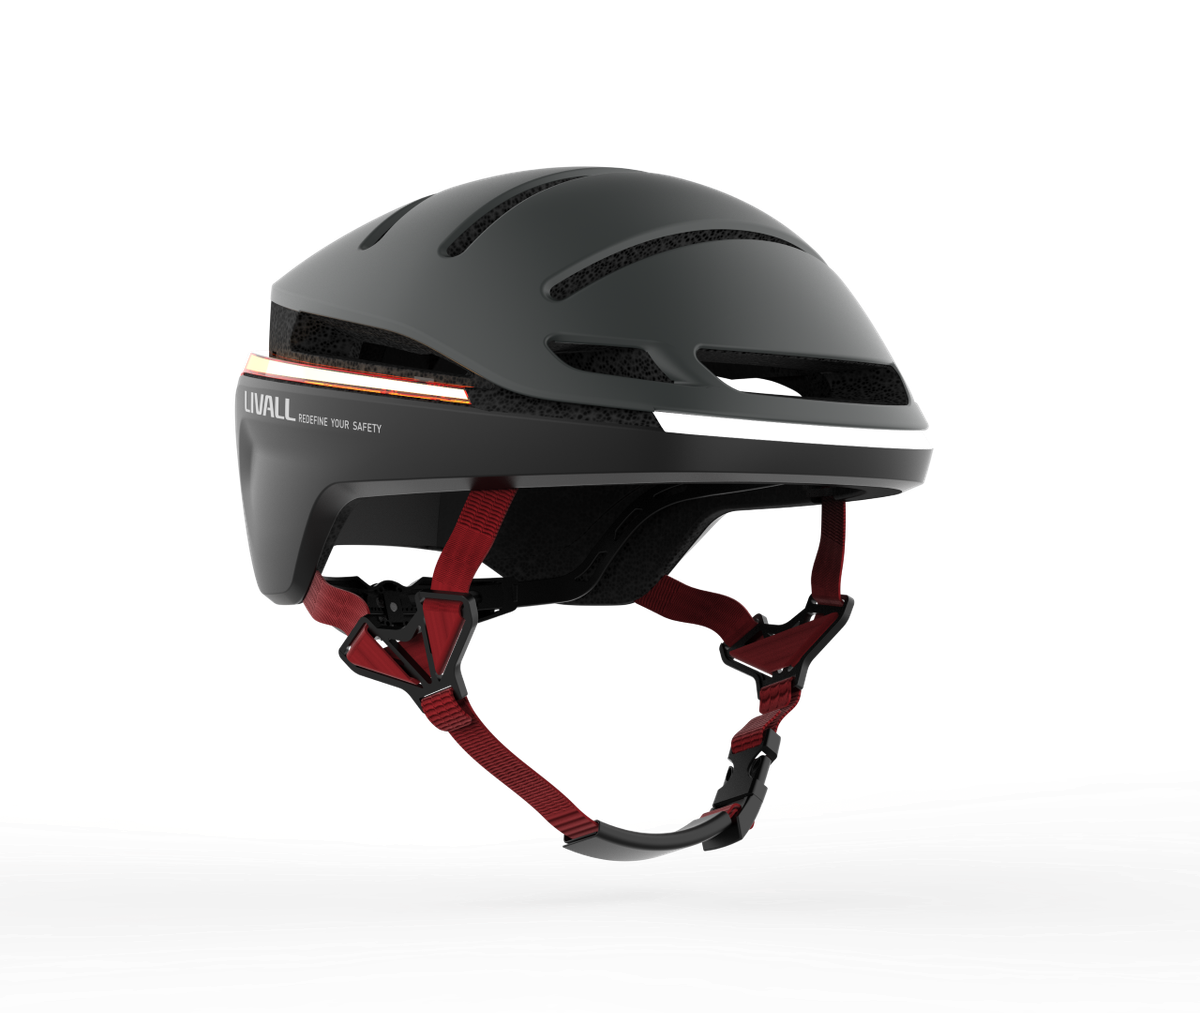 LIVALL EVO21 Helmet Review - a smart bike helmet with innovative safety features